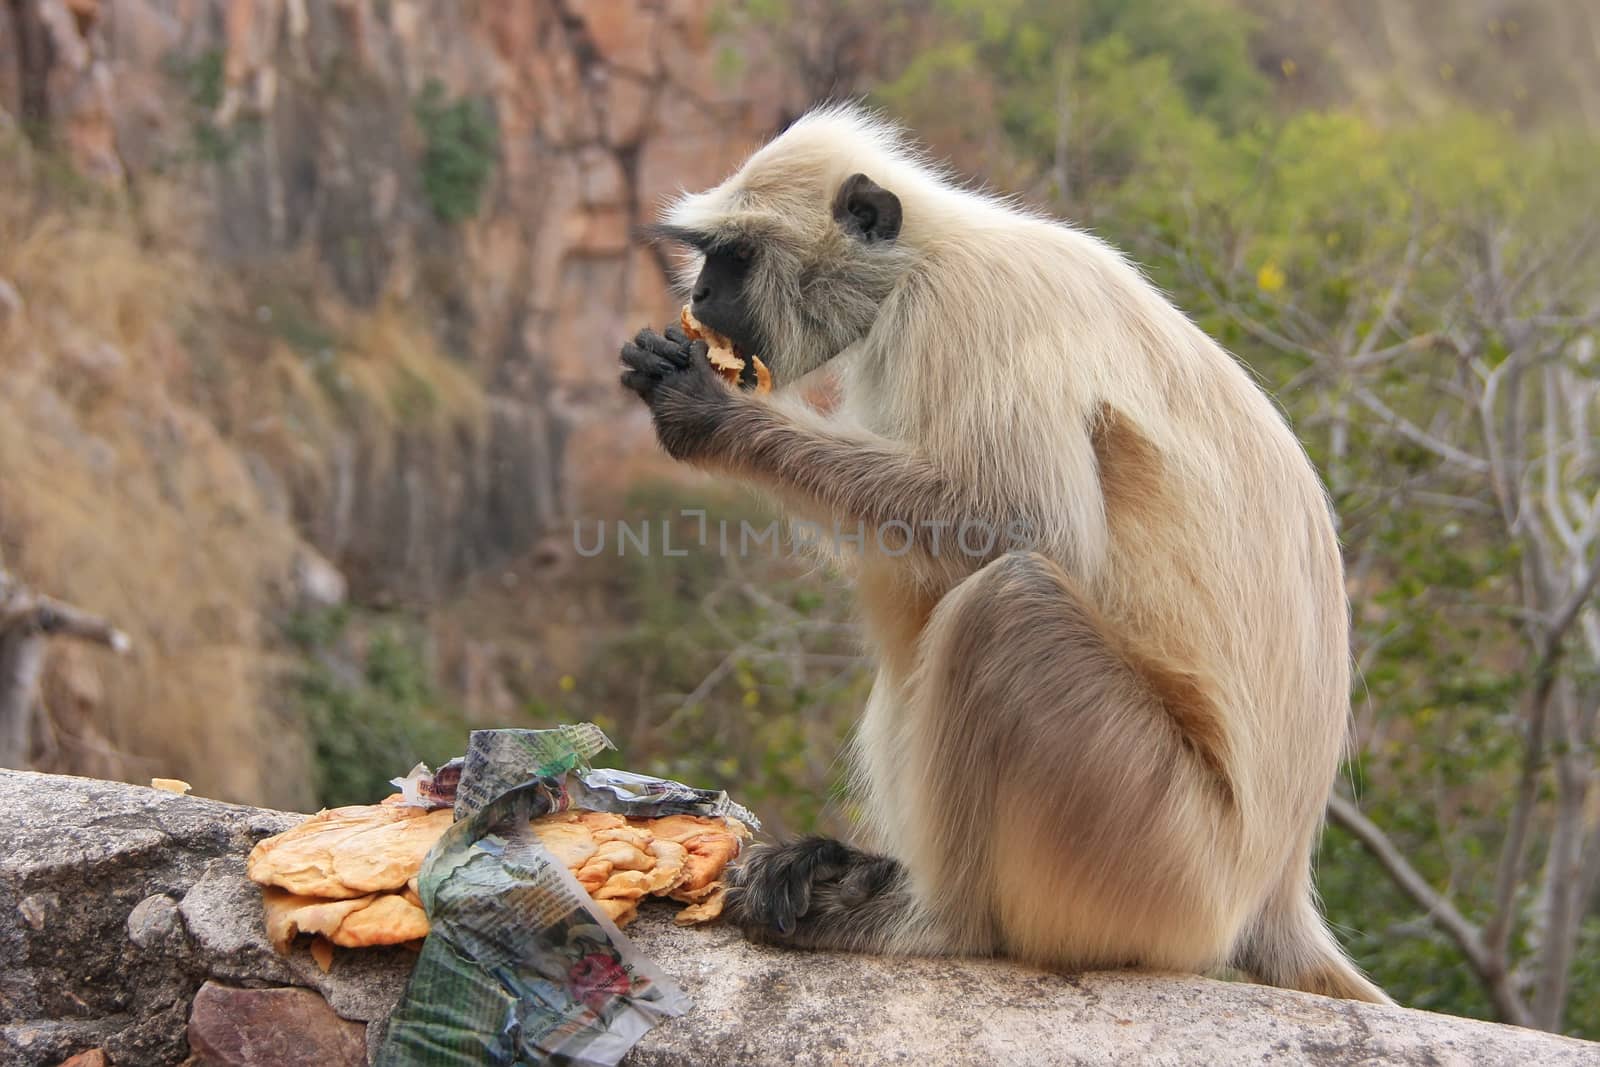 Gray langur (Semnopithecus dussumieri) eating at Ranthambore For by donya_nedomam